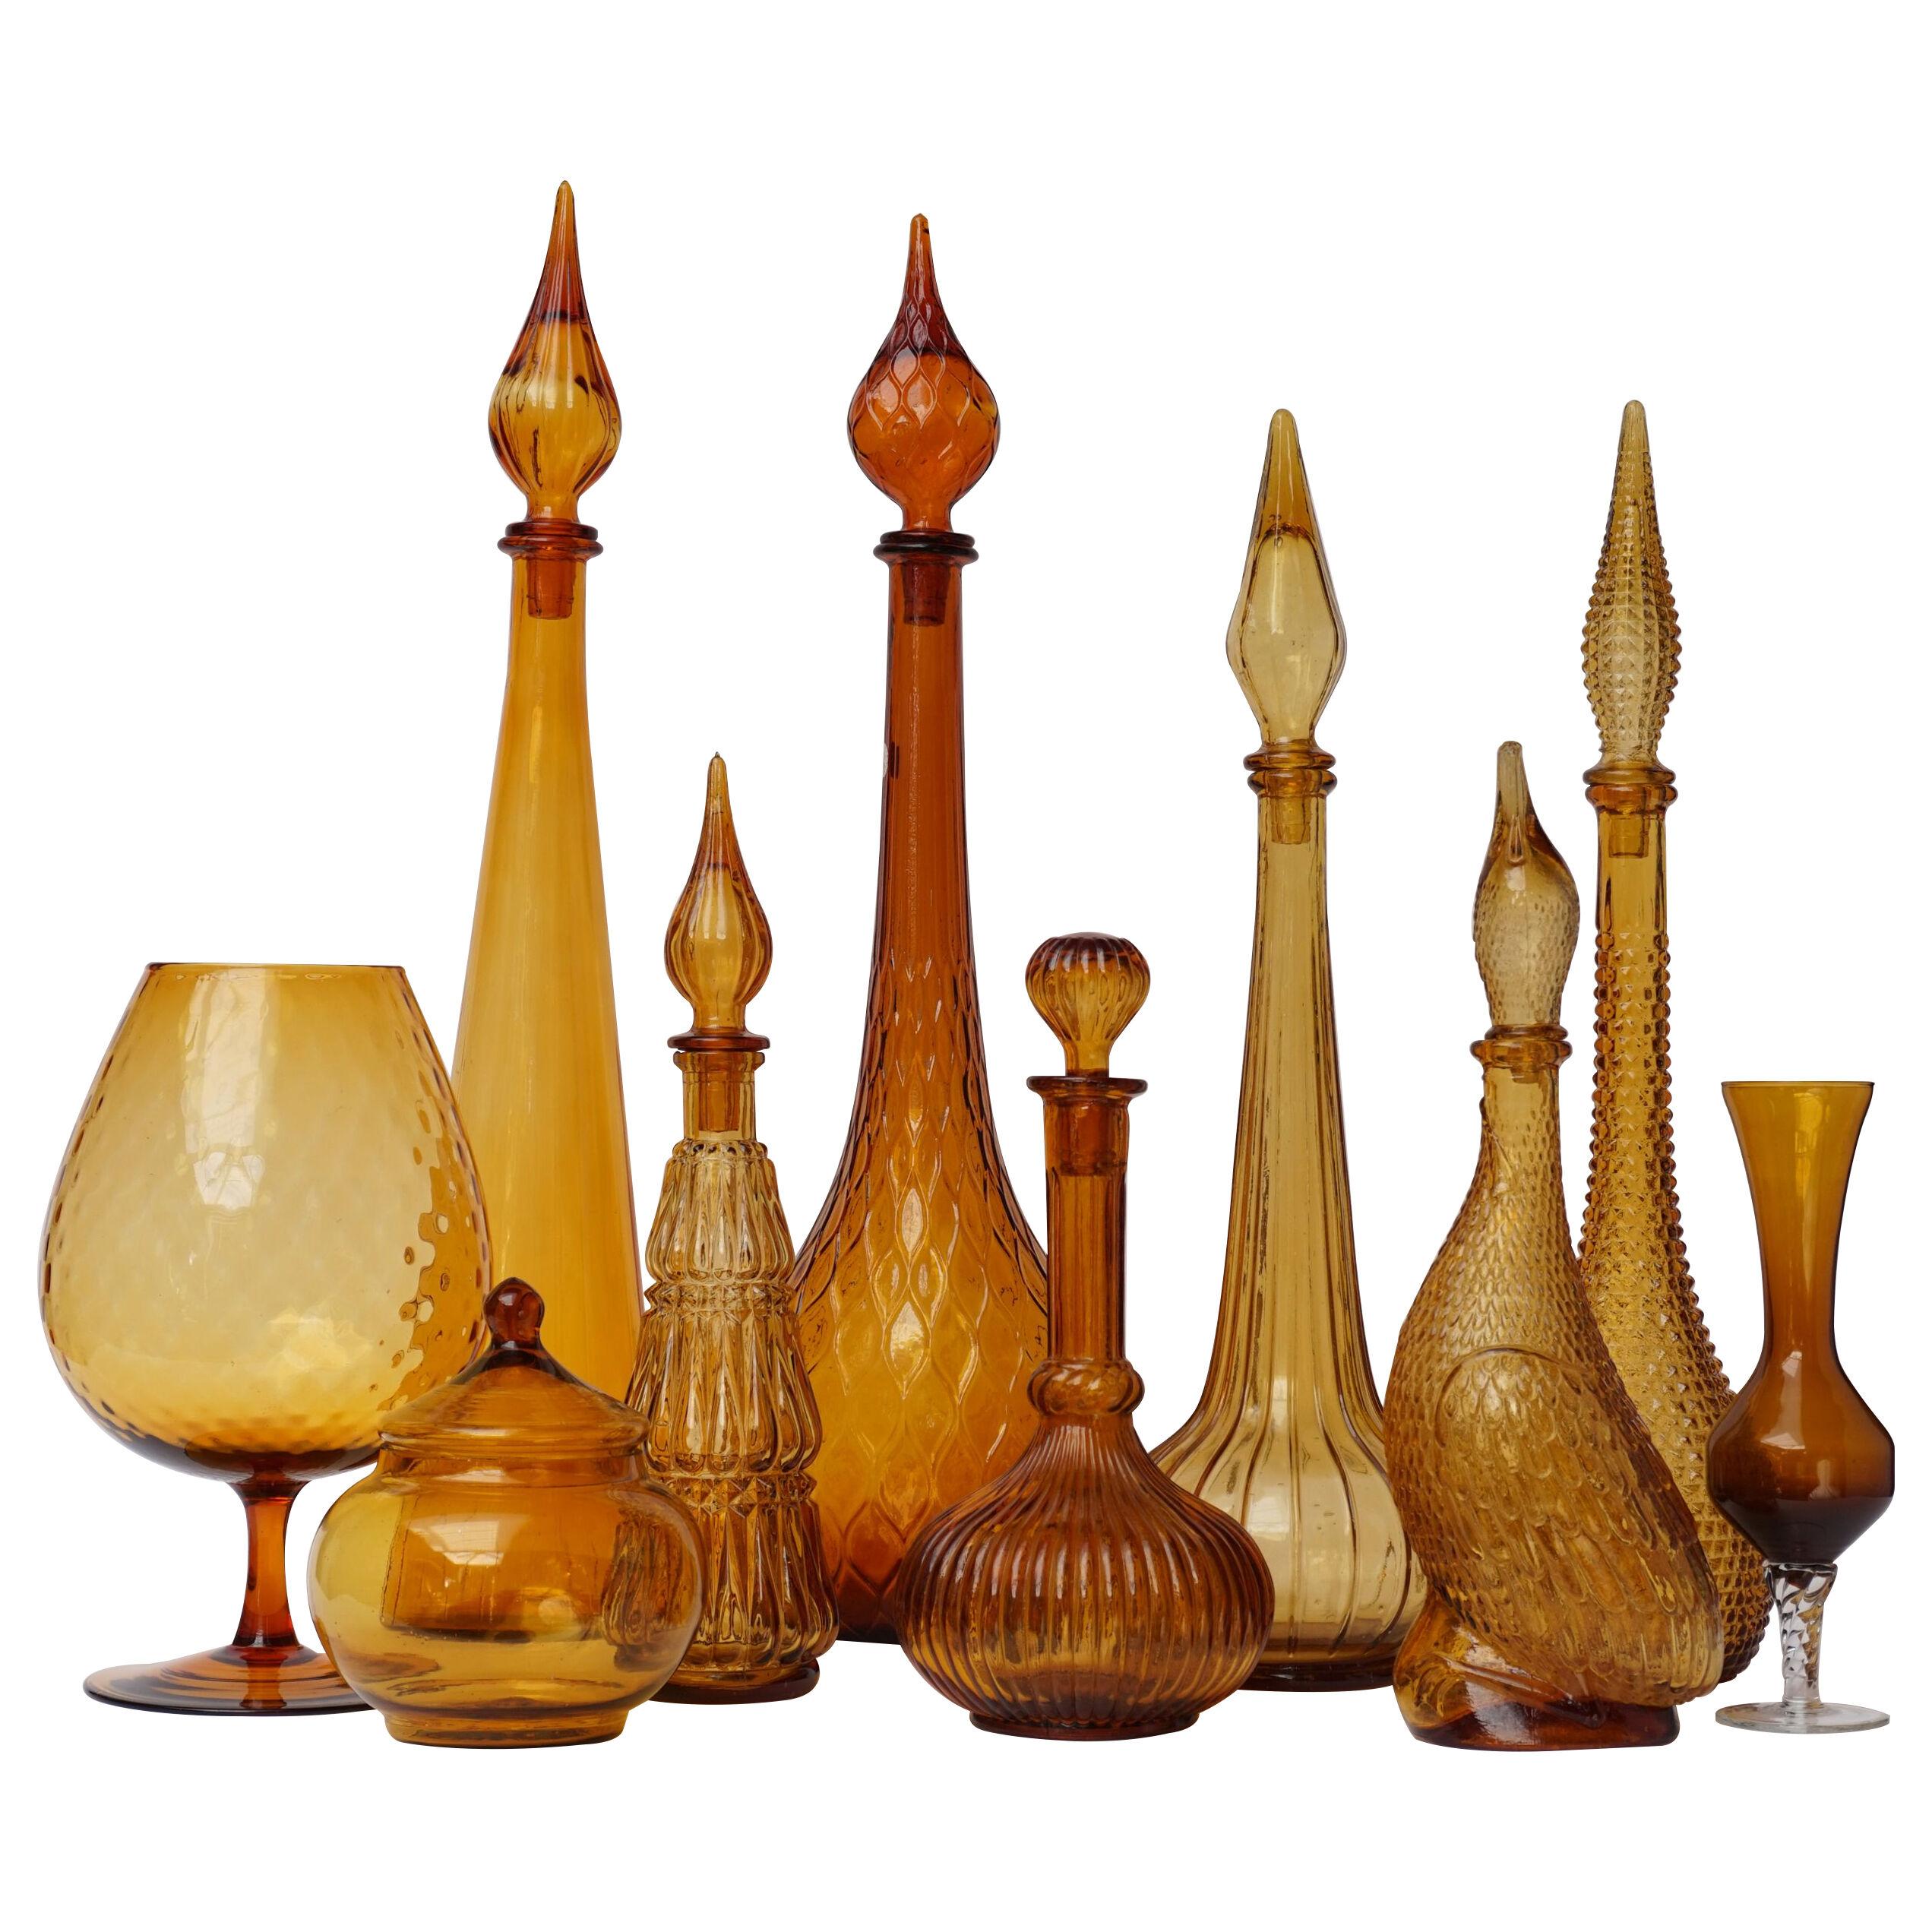 1960s Amber Glass Set of Ten Italian Empoli Genie Bottles, Vases and a Candy Jar